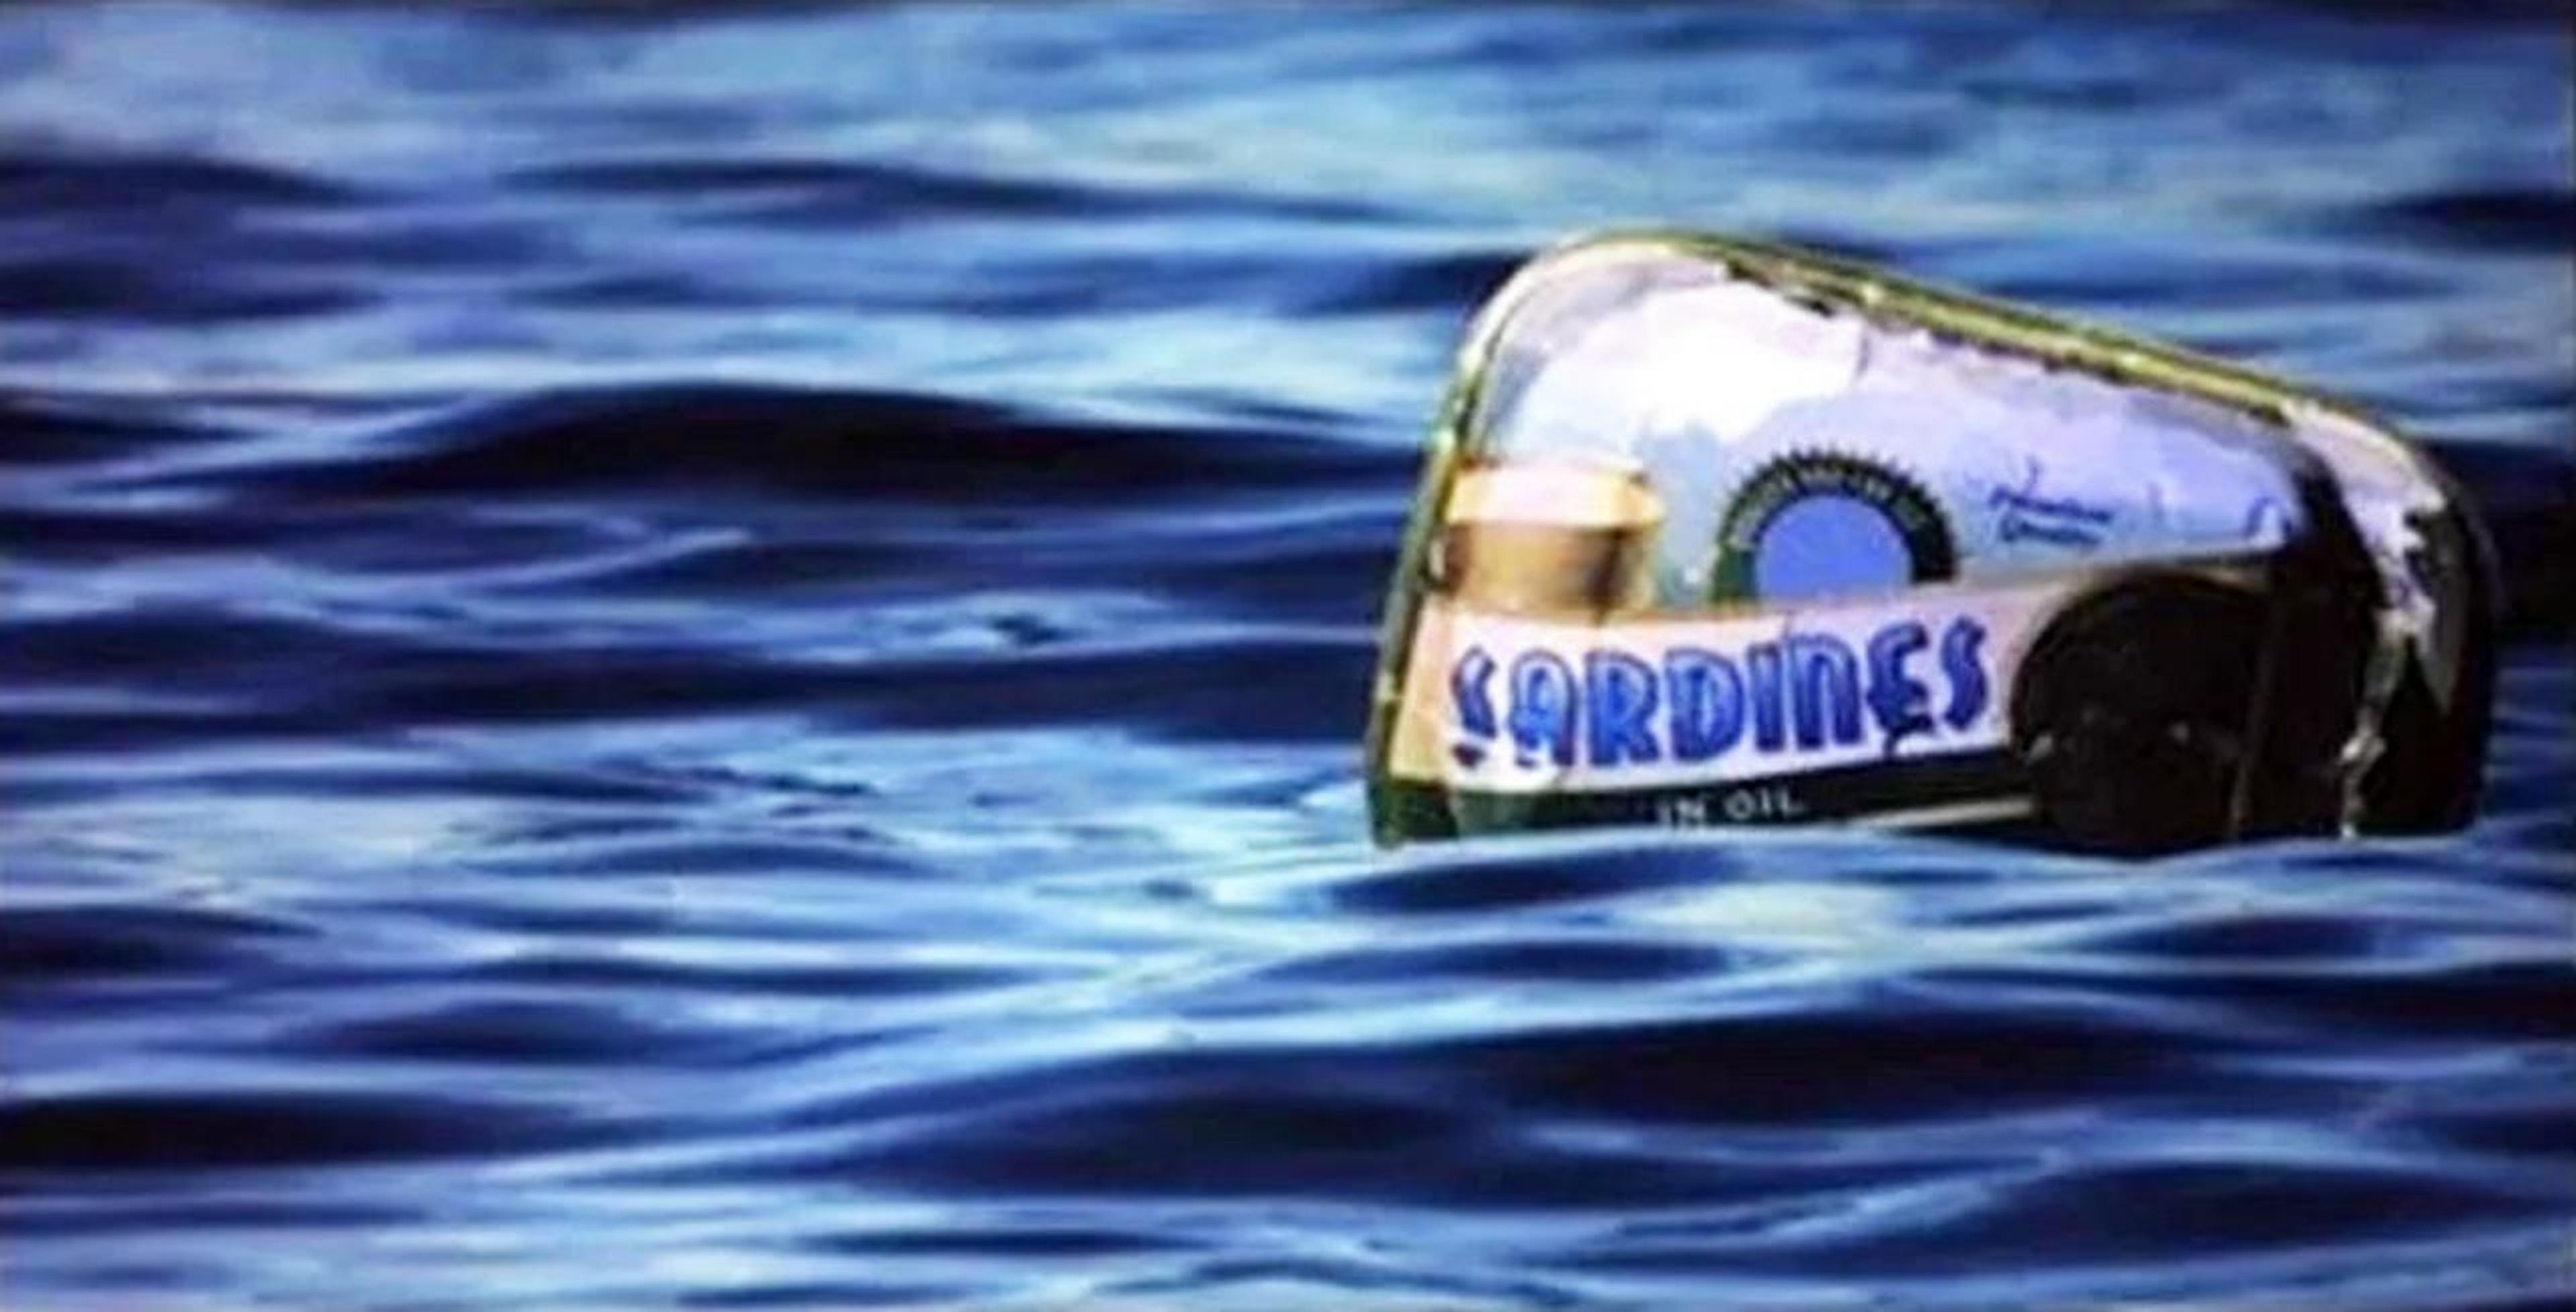 A tin of sardines out at sea